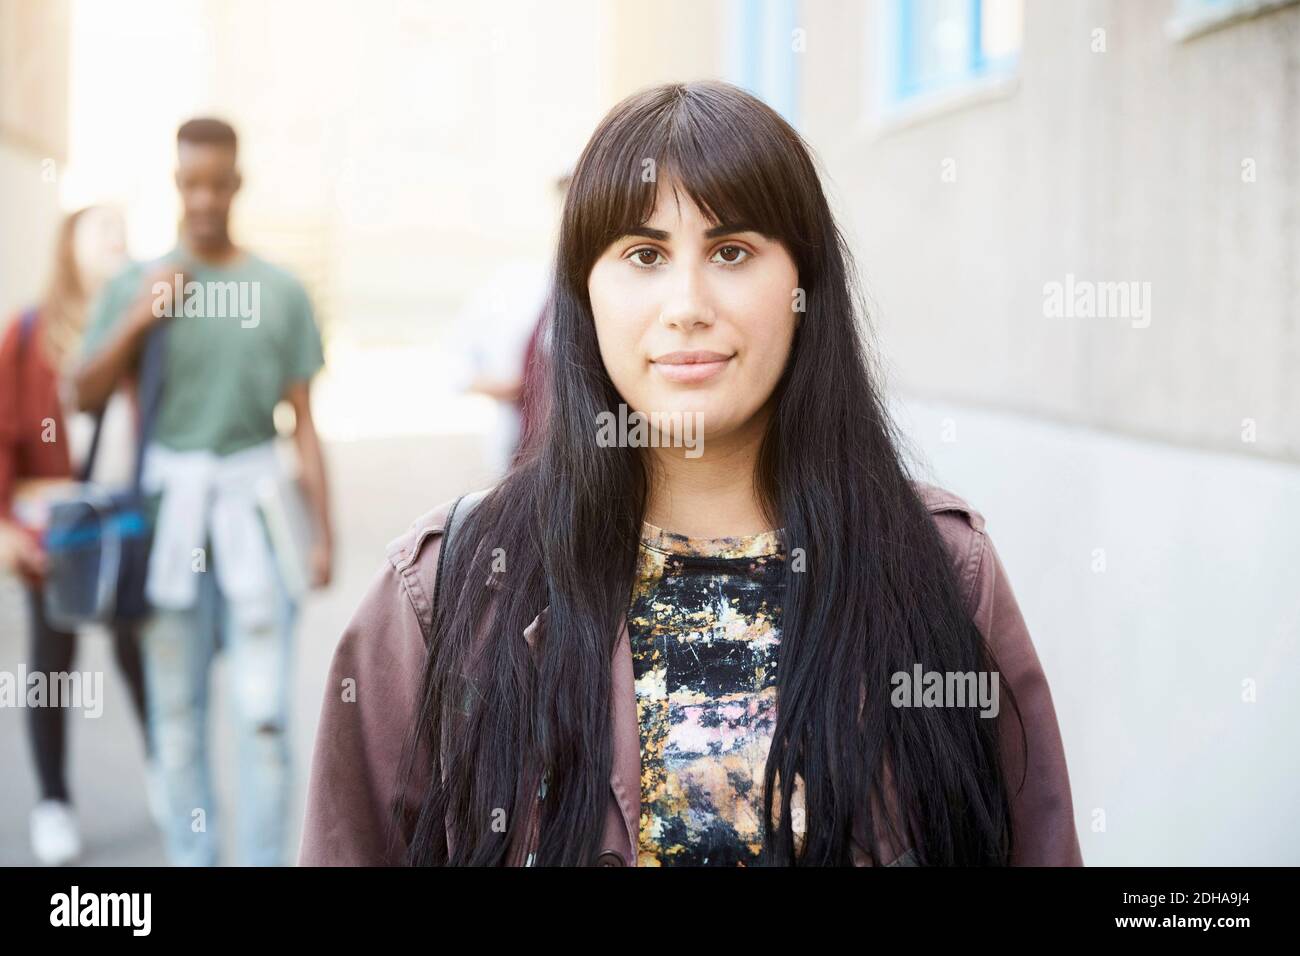 Portrait of young woman with long hair standing at university campus with friends in background Stock Photo